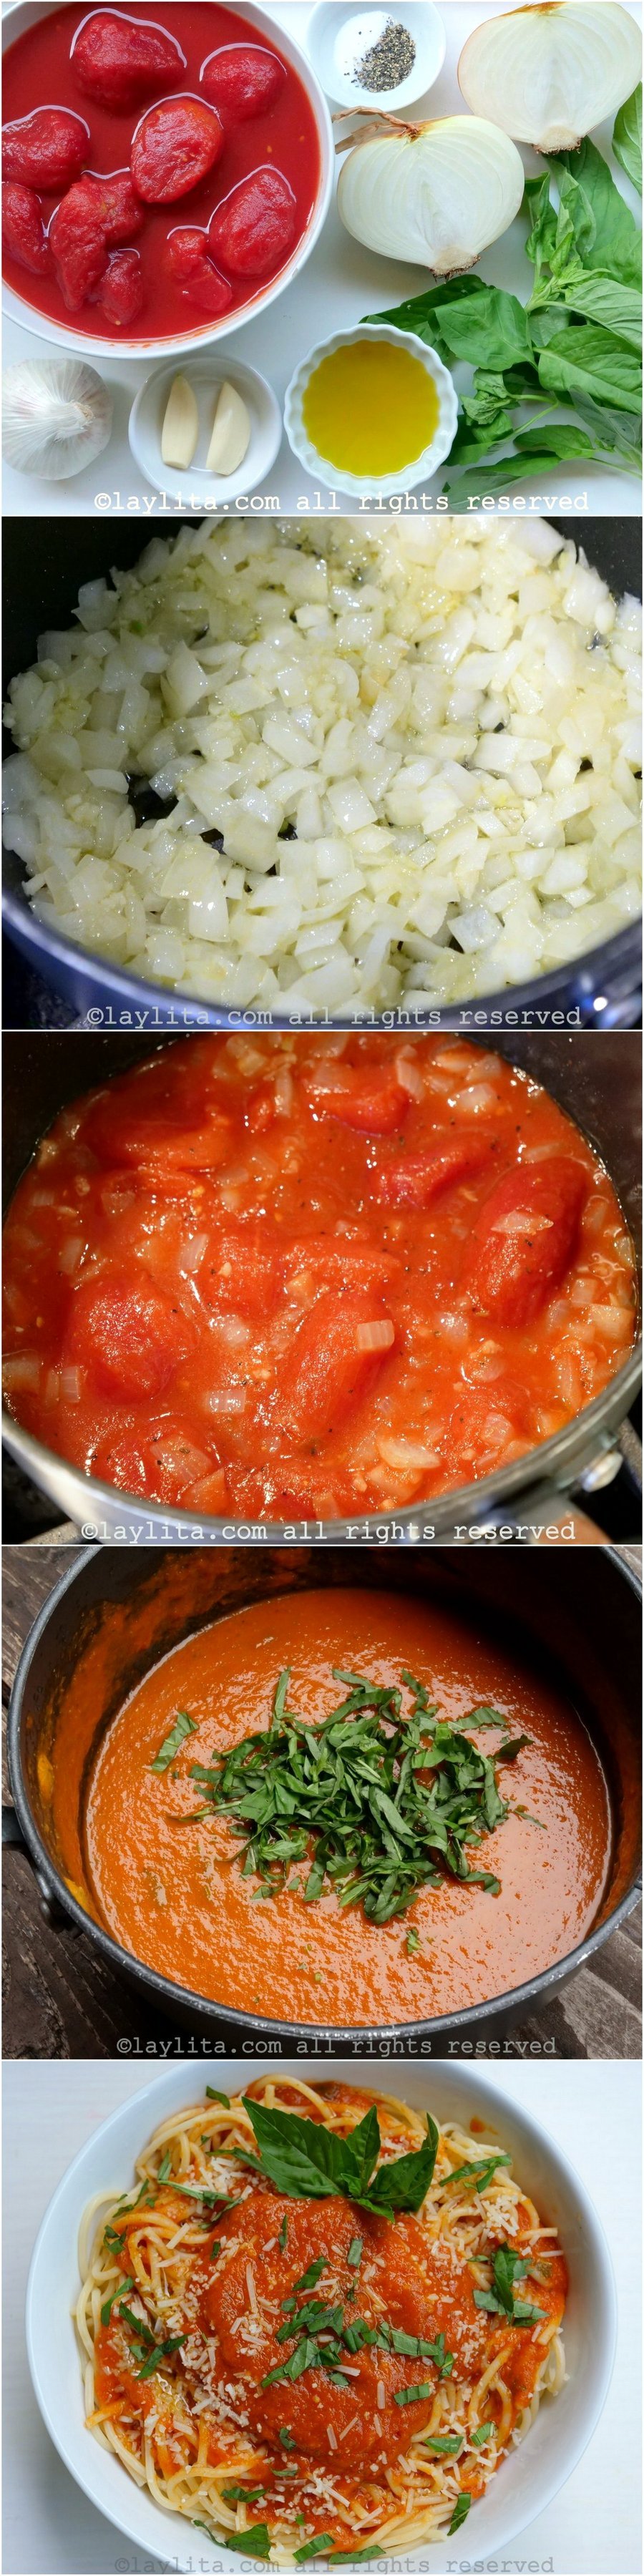 Step by step preparation for a basic tomato basil sauce recipe